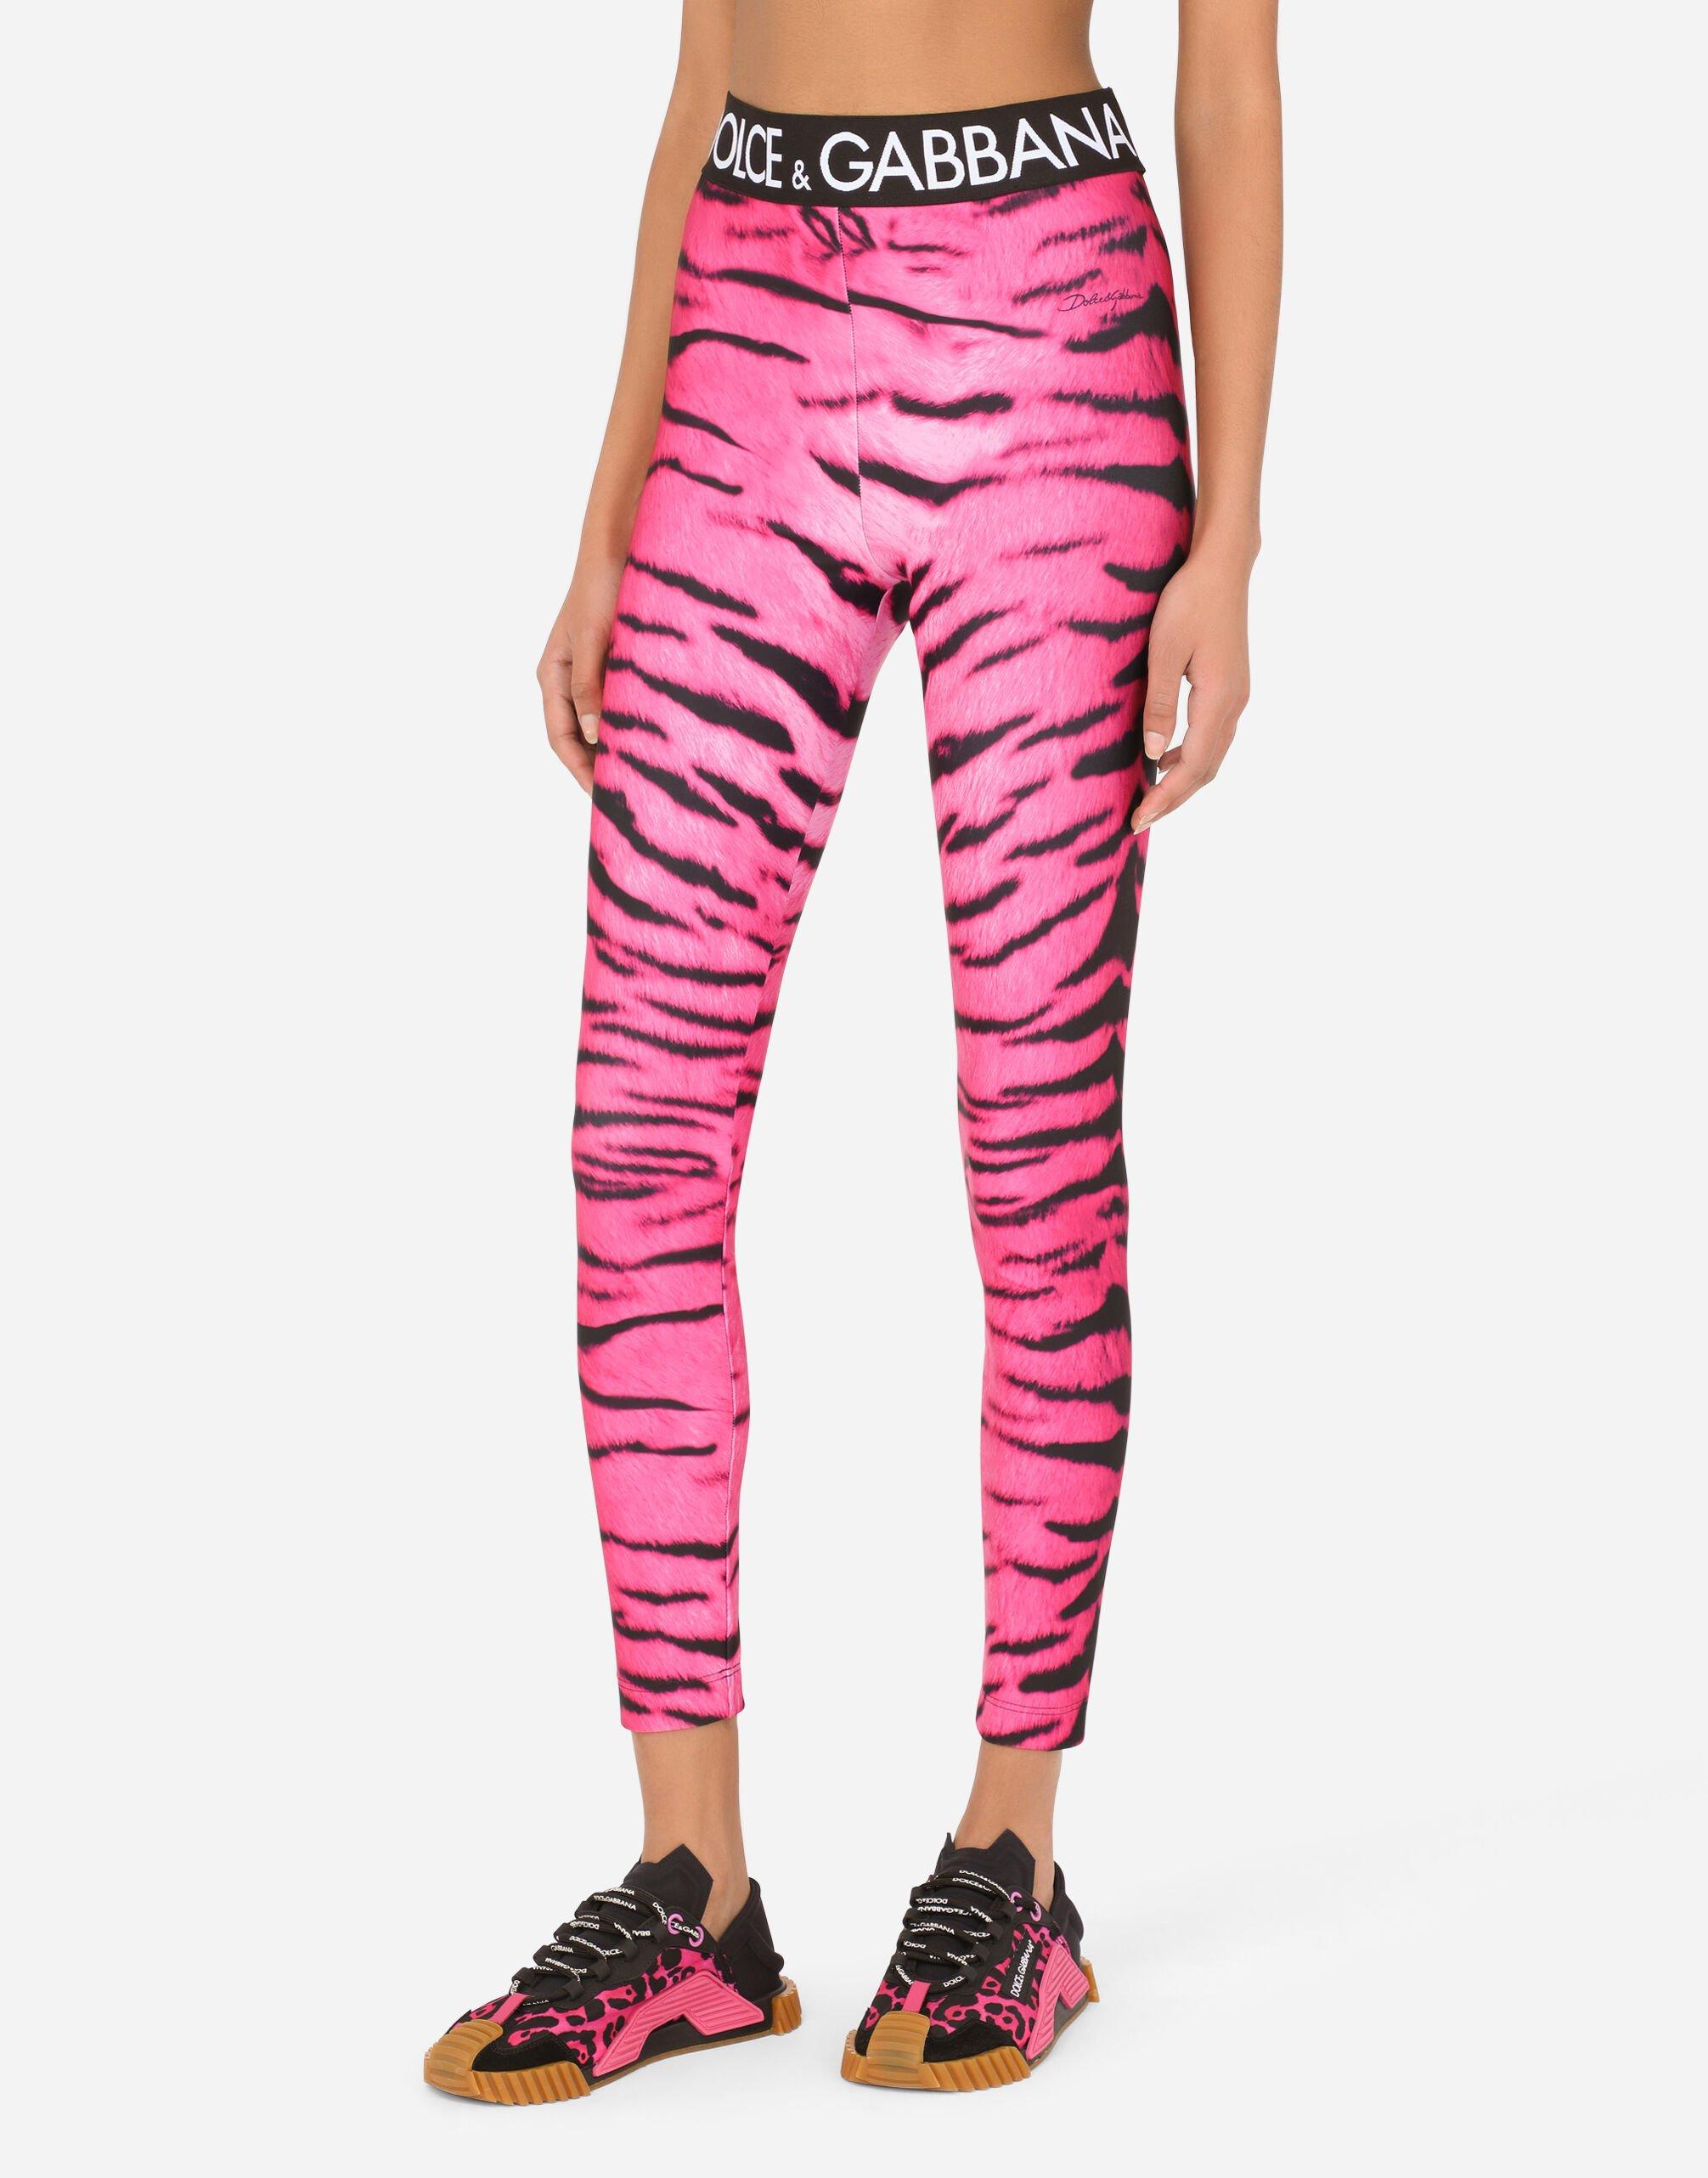 Dolce & Gabbana Run-resistant Fabric leggings With Tiger Print And Branded  Elastic in Pink